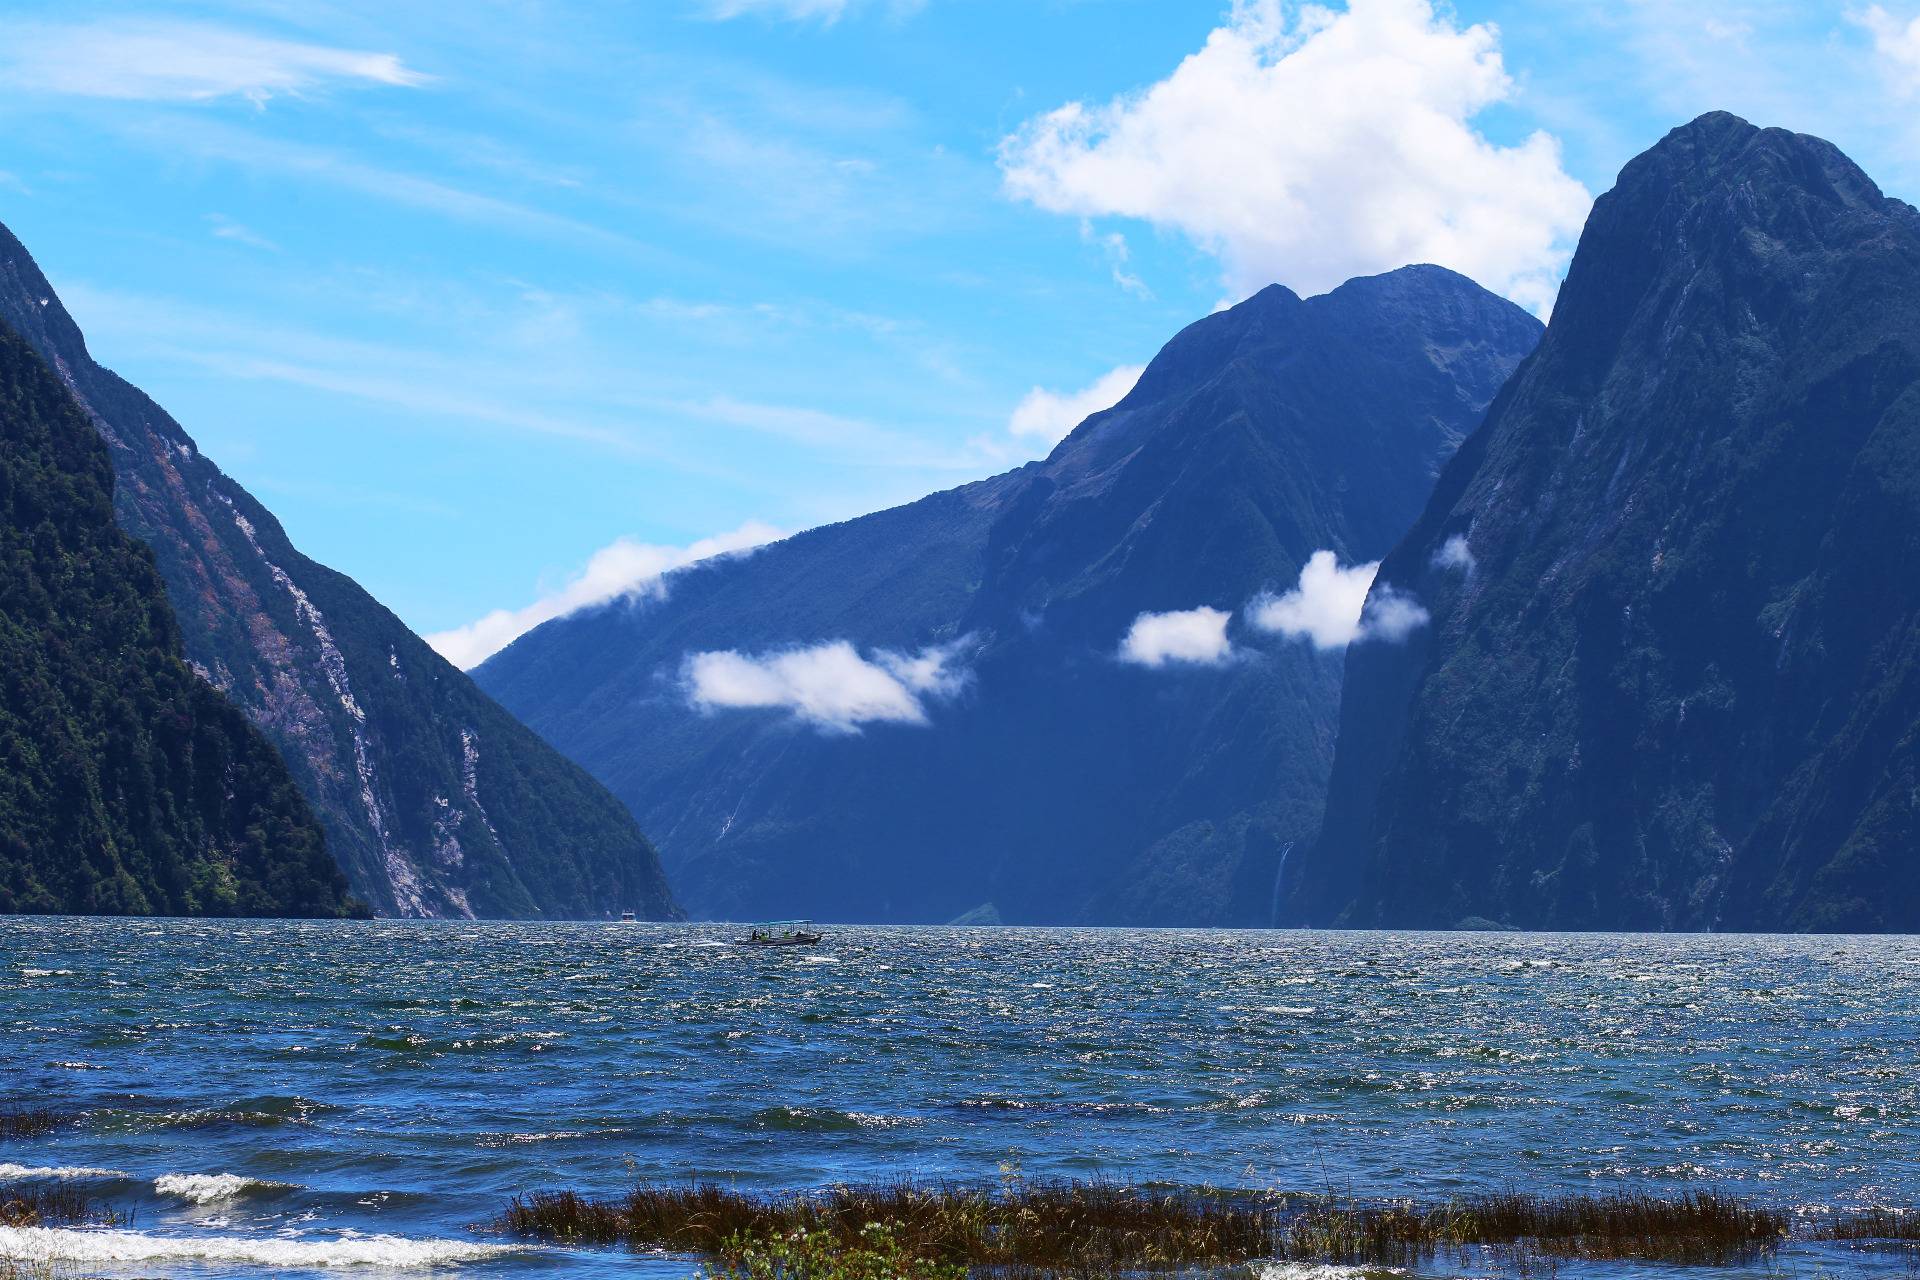 Amazing landscape at Milford Sound in New Zealand  